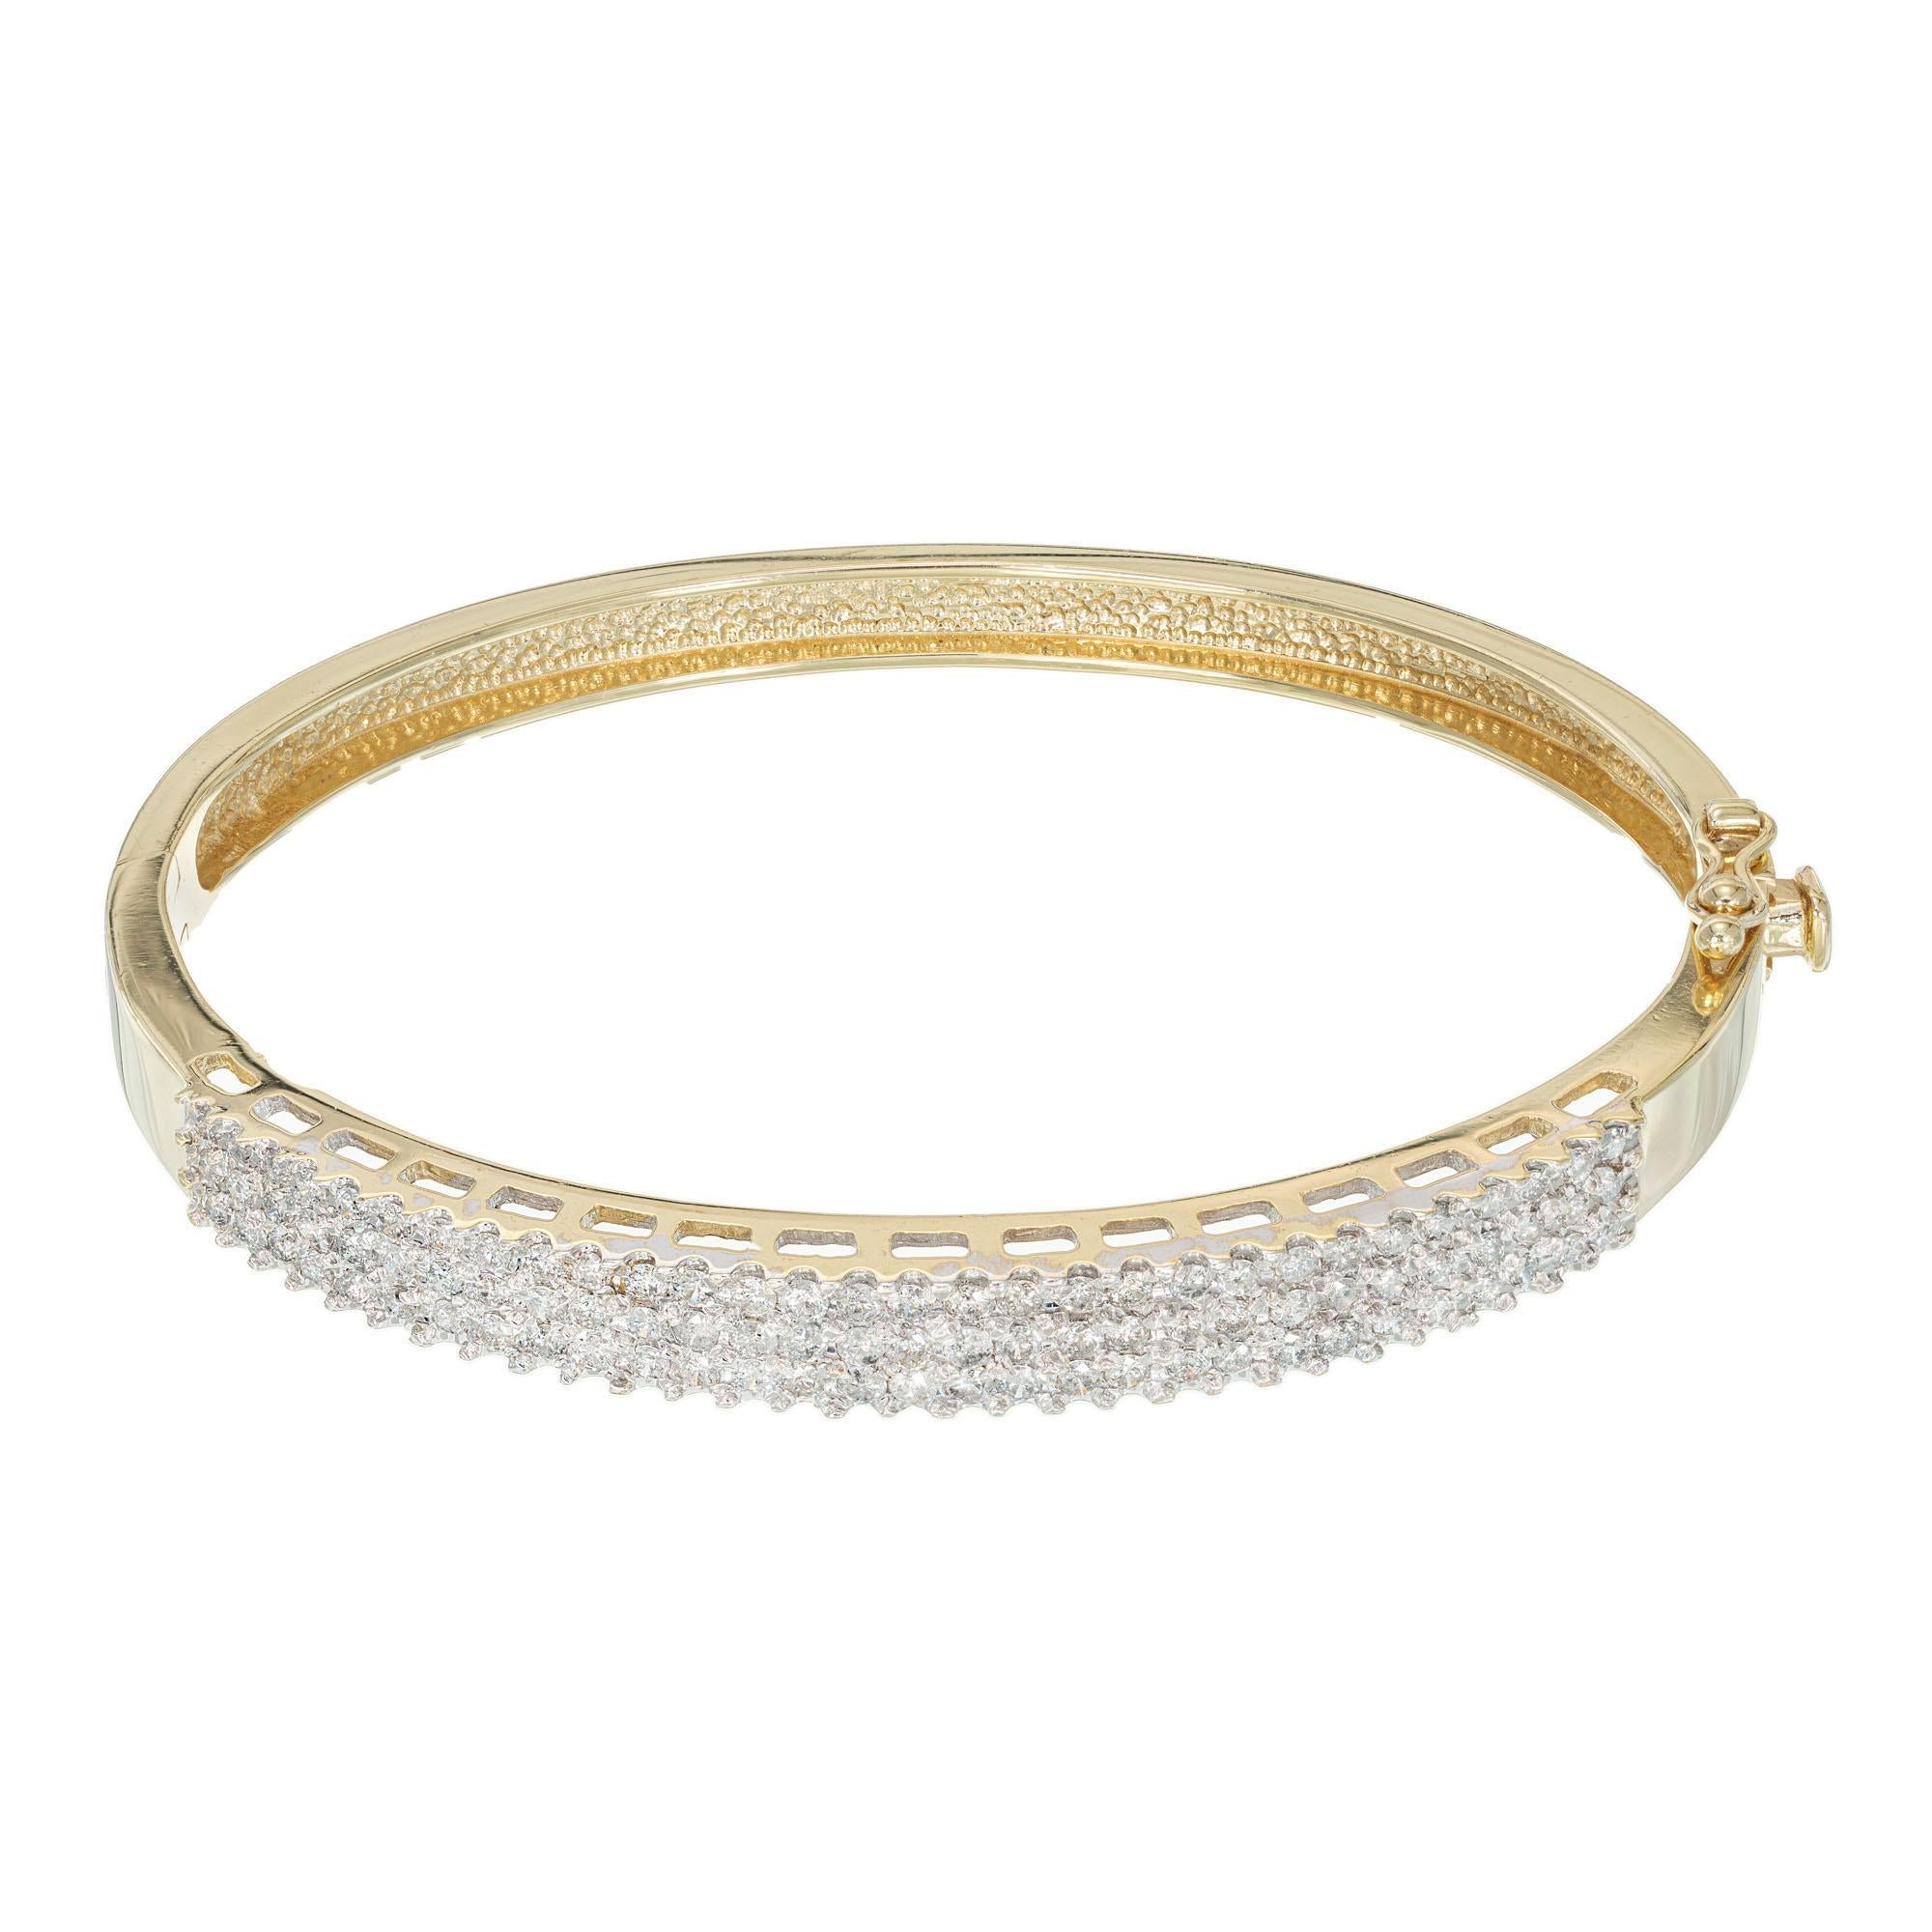 1970's Three-row diamond bangle bracelet. The White gold top is set with 90 round cut diamonds and set in 14k yellow gold bangle. Hidden catch and side safety. 7-7 1/2 inch wrist. 

90 round diamonds approx. total weight 1.80cts.  F color, SI1 to